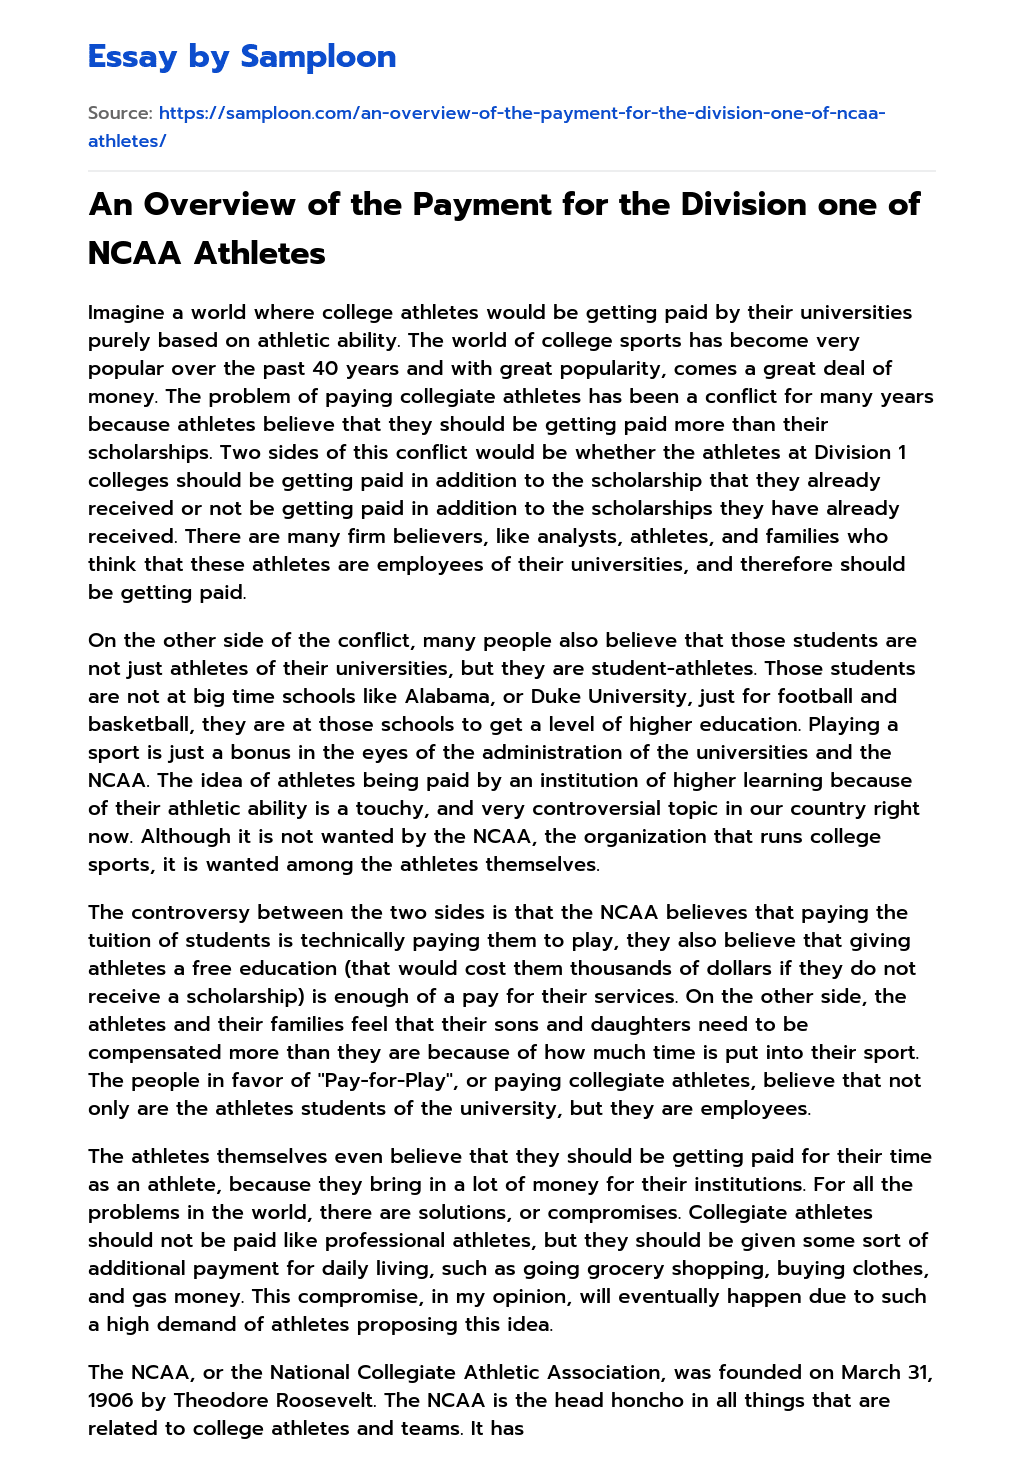 An Overview of the Payment for the Division one of NCAA Athletes essay